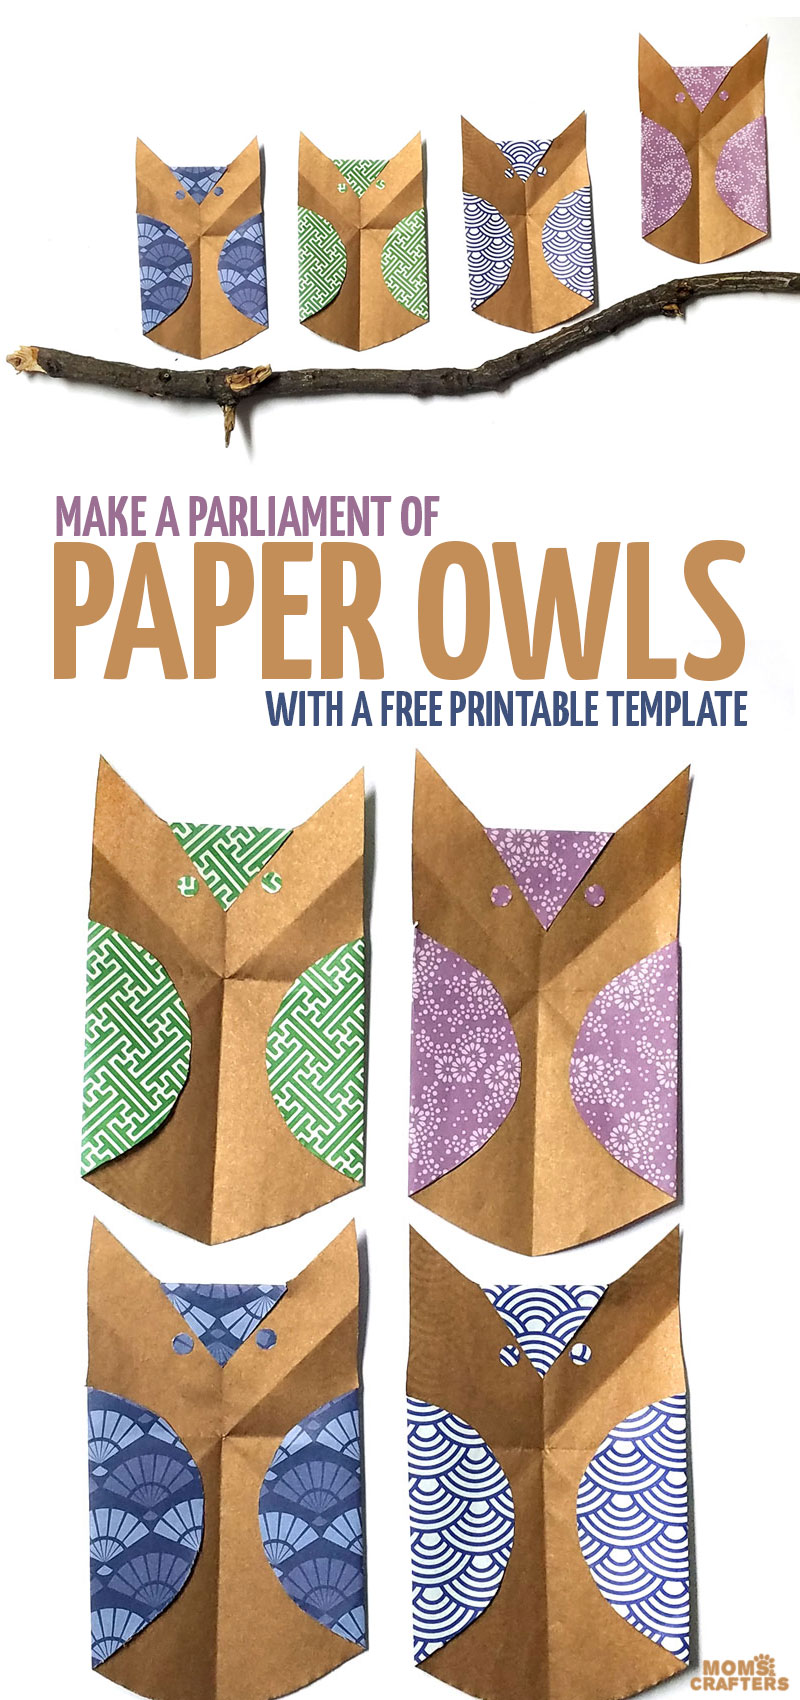 Download the free printable template to make this fun paper owl craft - it's super easy! This paper folding DIY can be used for decor, wall hangings, or just as an easy kids craft. Make a parliament of owls using a simple fold technique thta's not quite origami and not quite kirigami - these fun foldered papercraft templates made a beautiful woodland owl craft for autumn or any time of year!